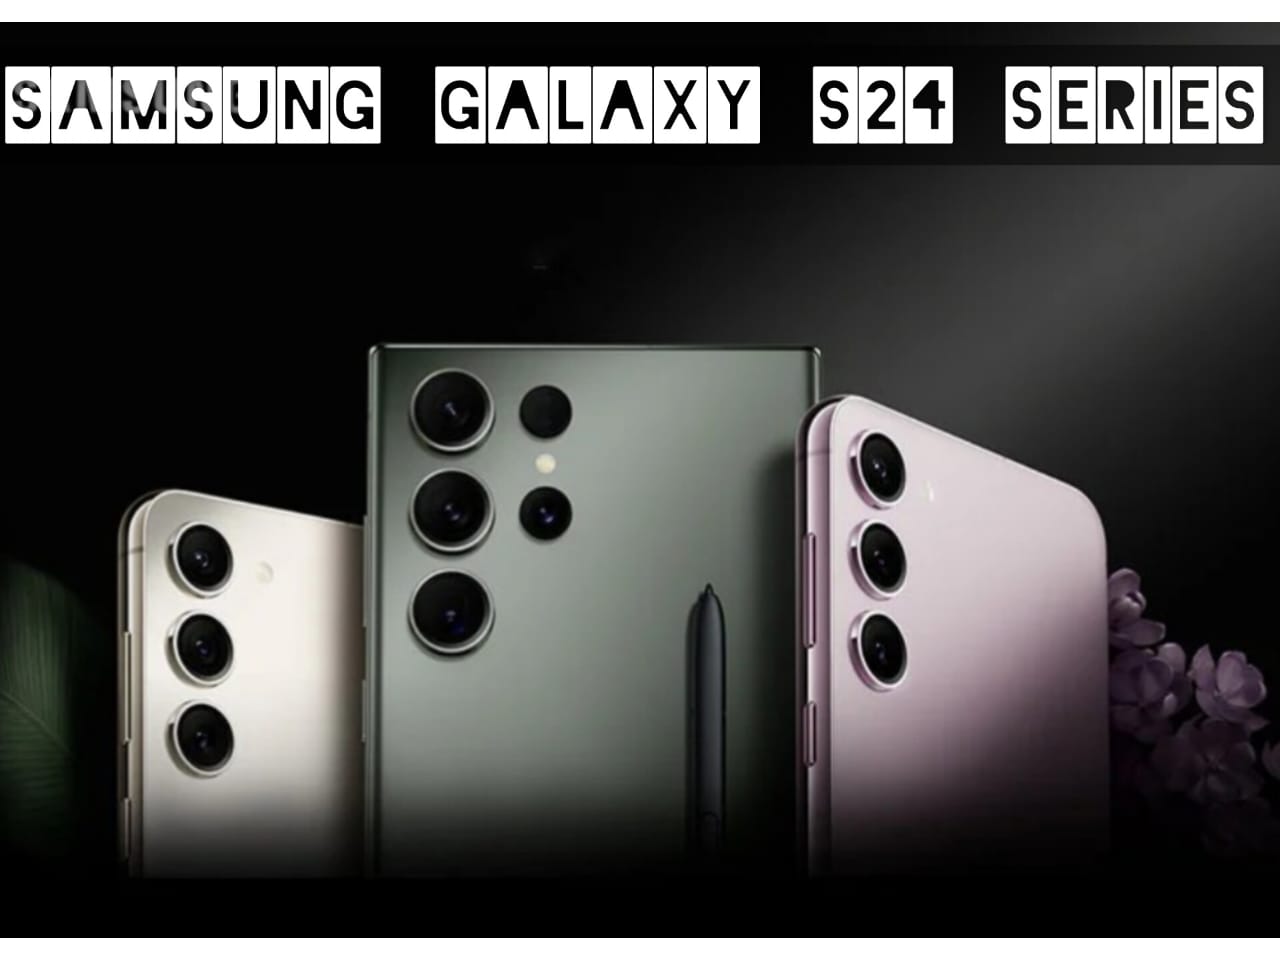 Samsung Galaxy S24 Series: Everything You Need to Know